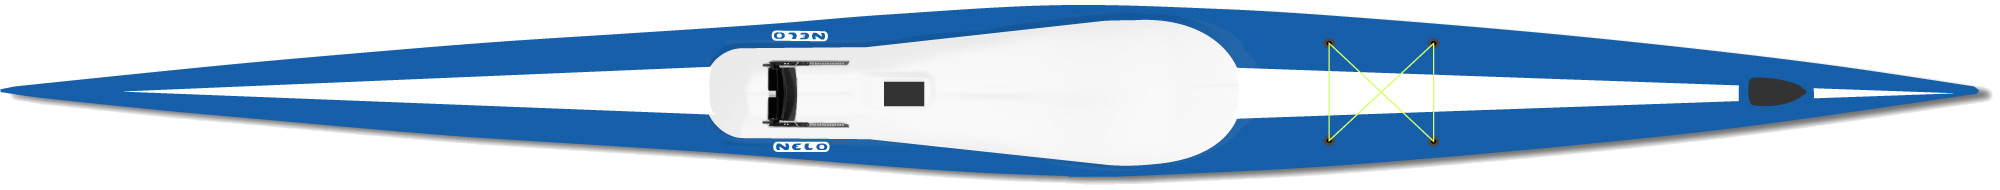 Nelo surfskis for sale here